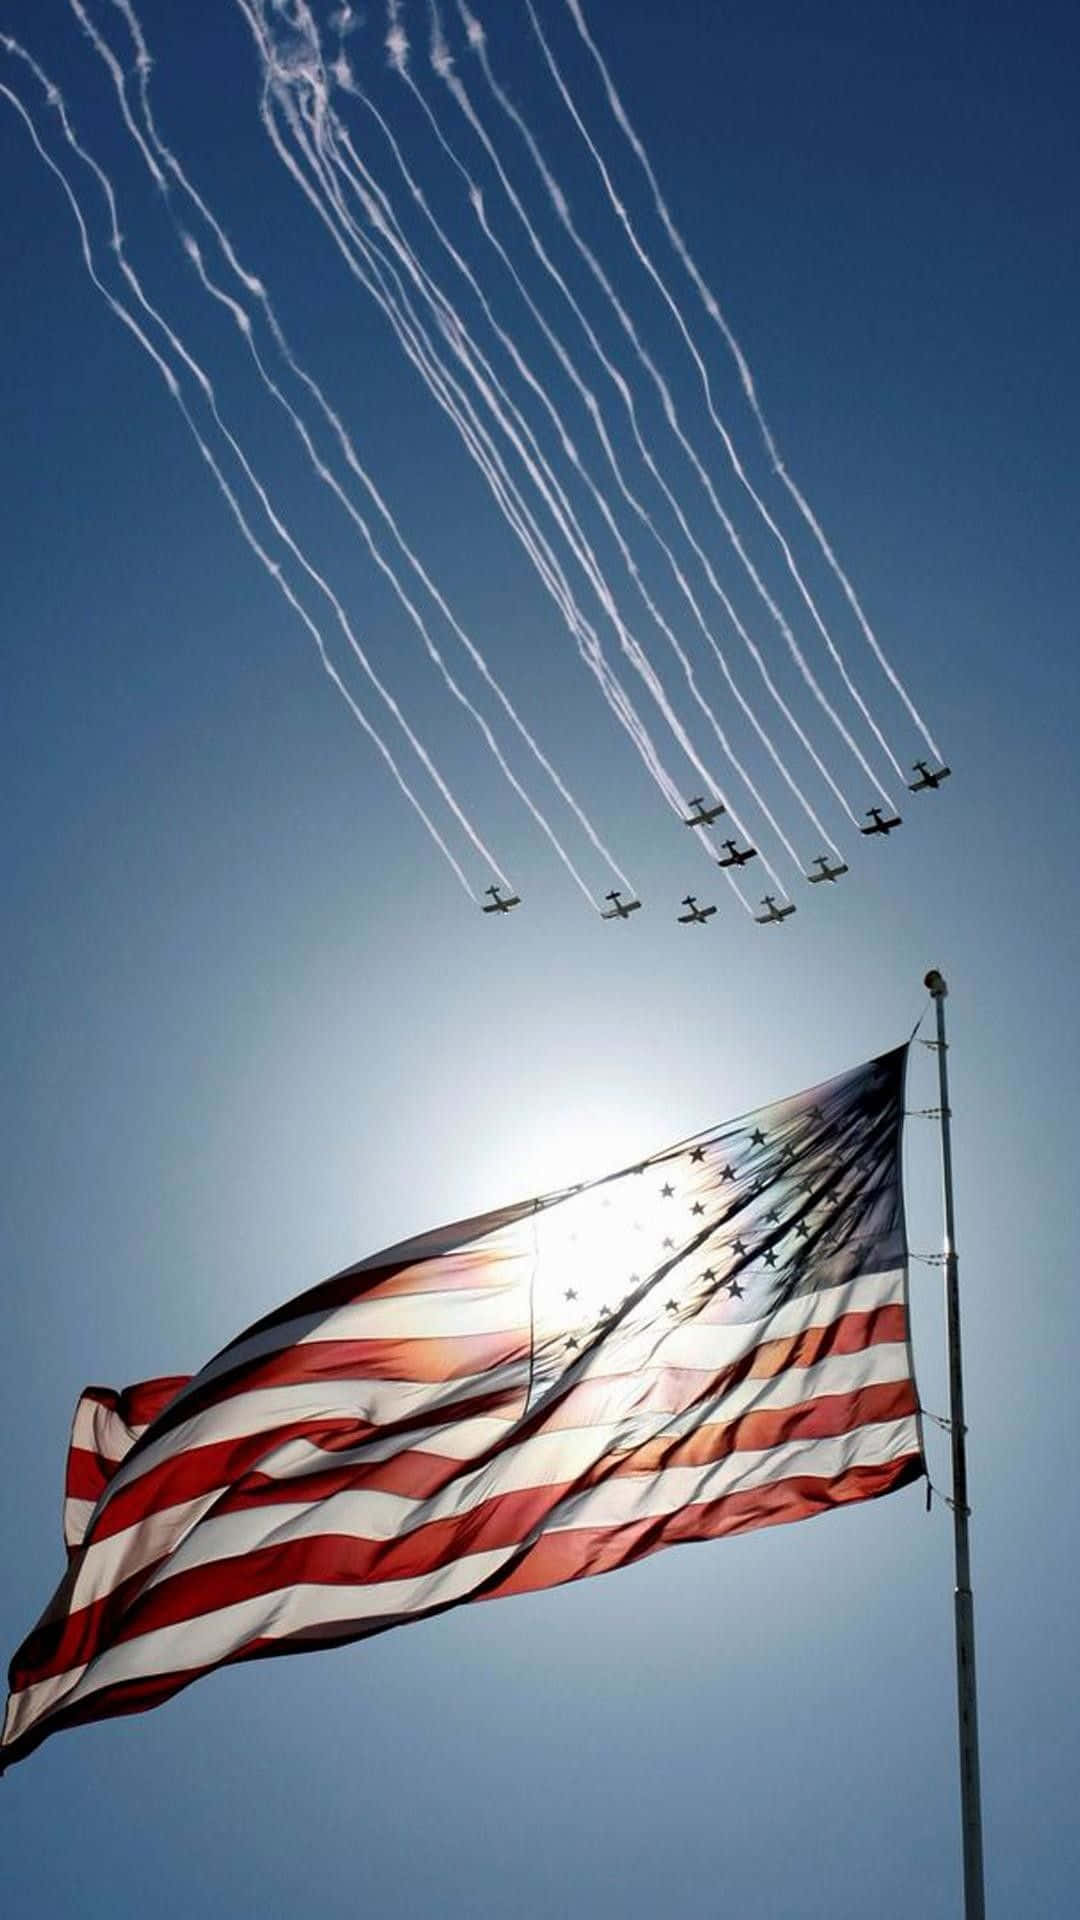 Usa Iphone Flag With Jets Background